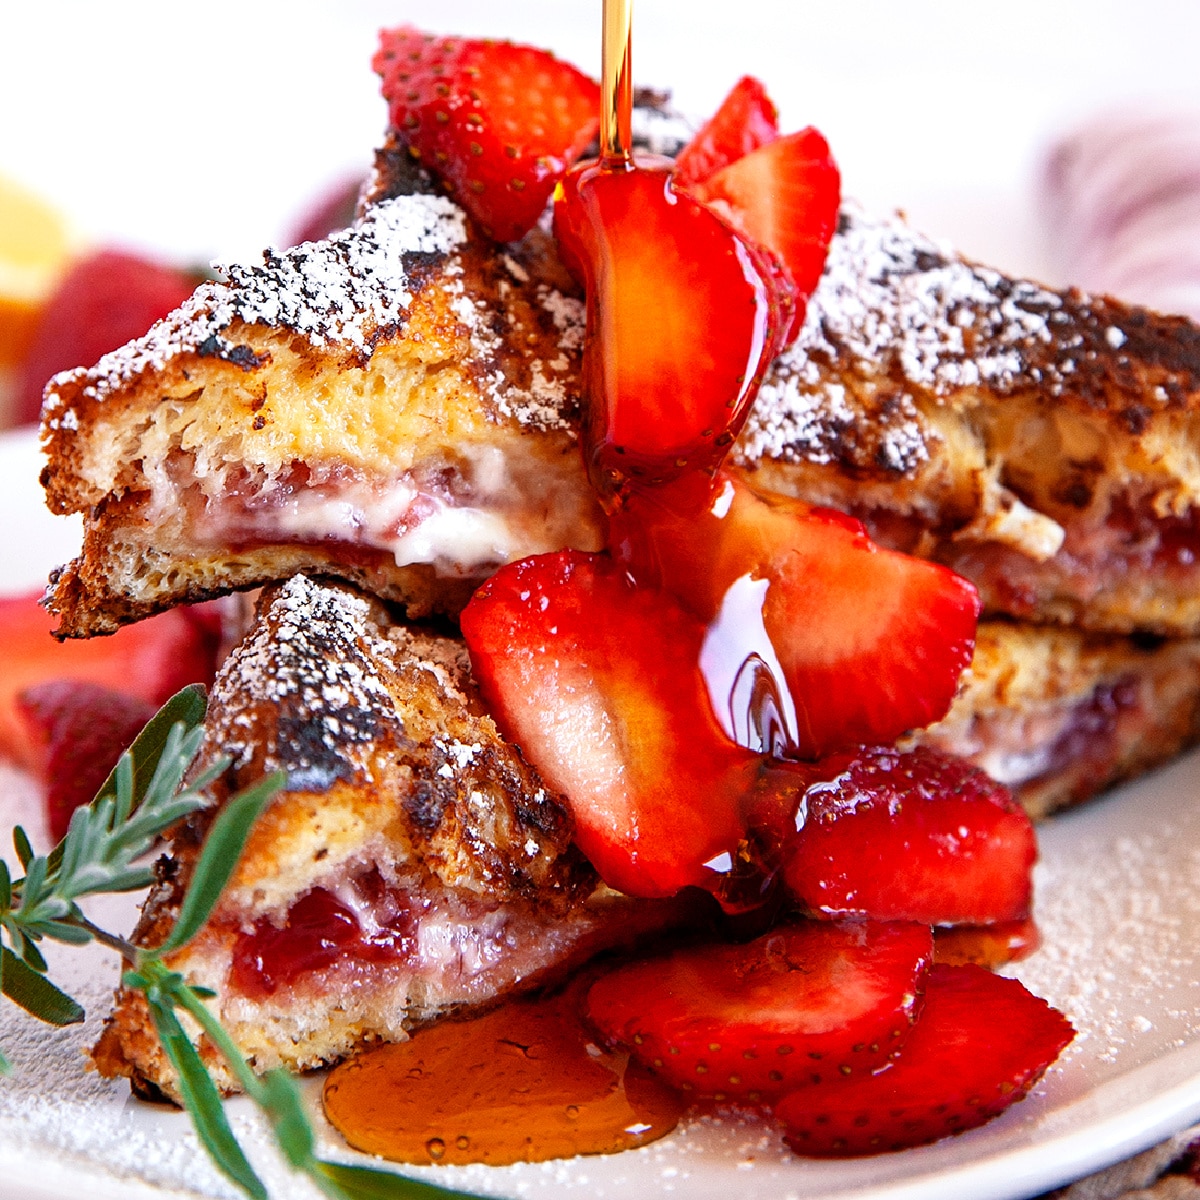 Square photo of maple syrup being poured on strawberry stuffed French toast. 